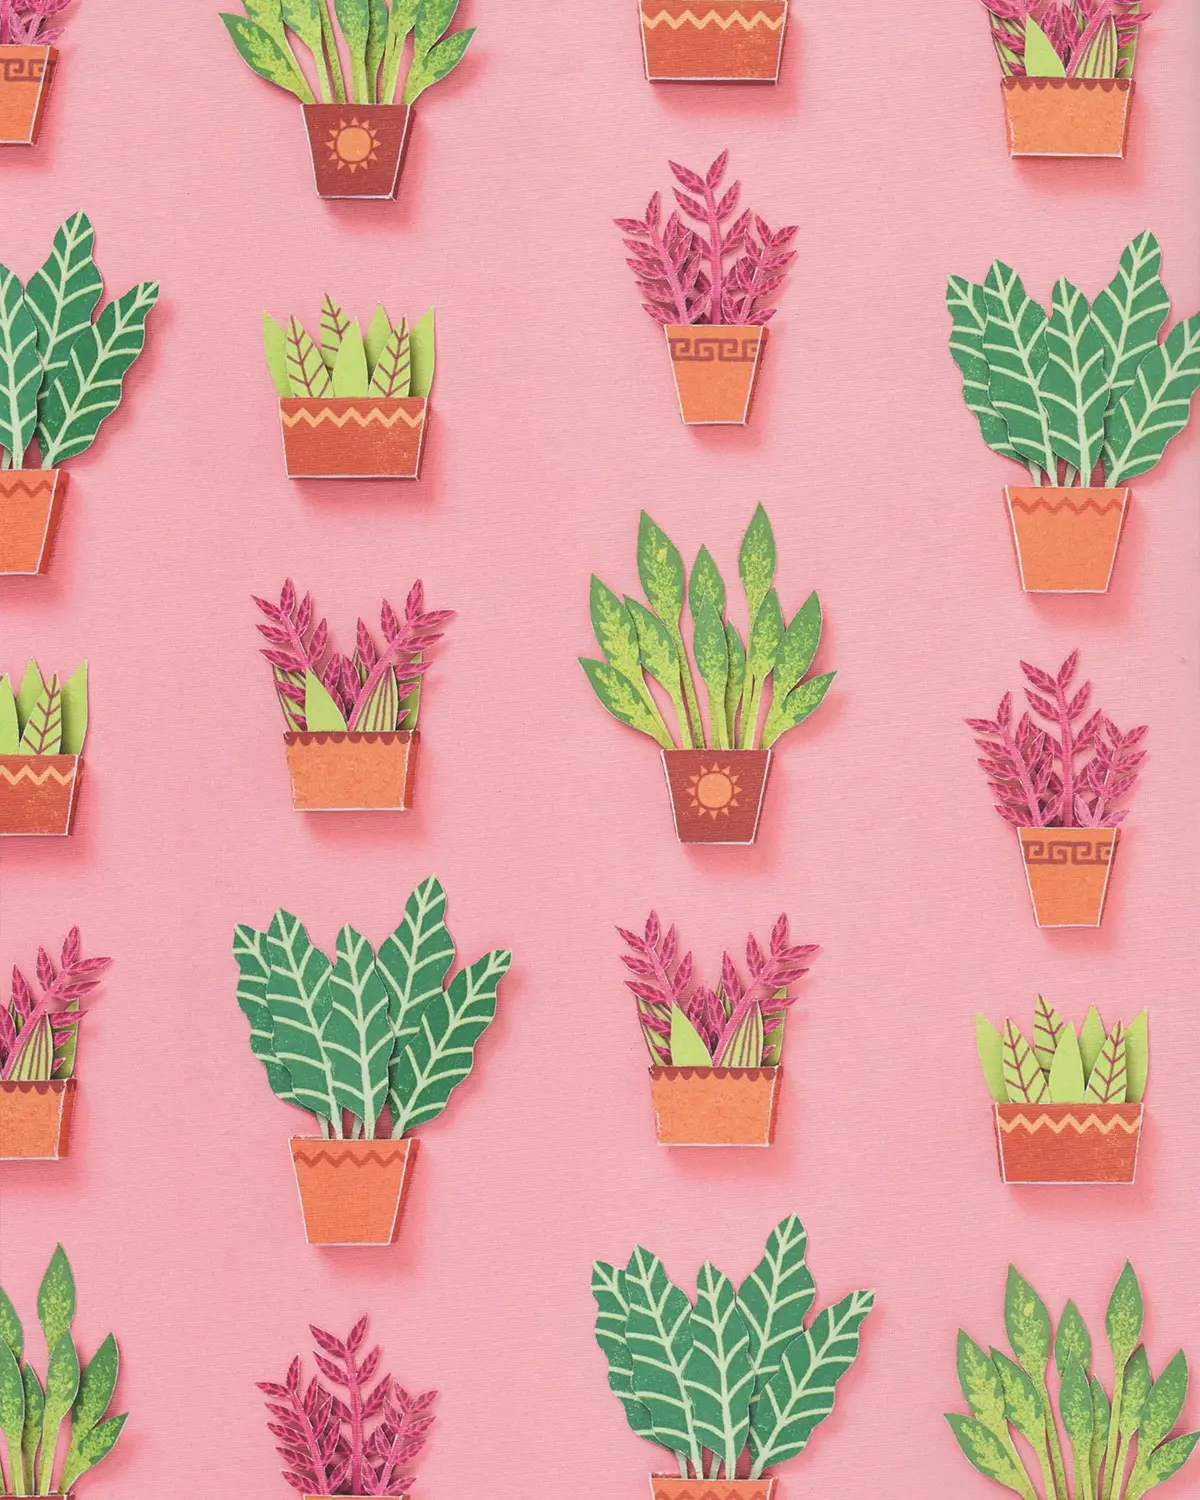 Project Calm: Pretty plants laid out in a pattern for end papers.